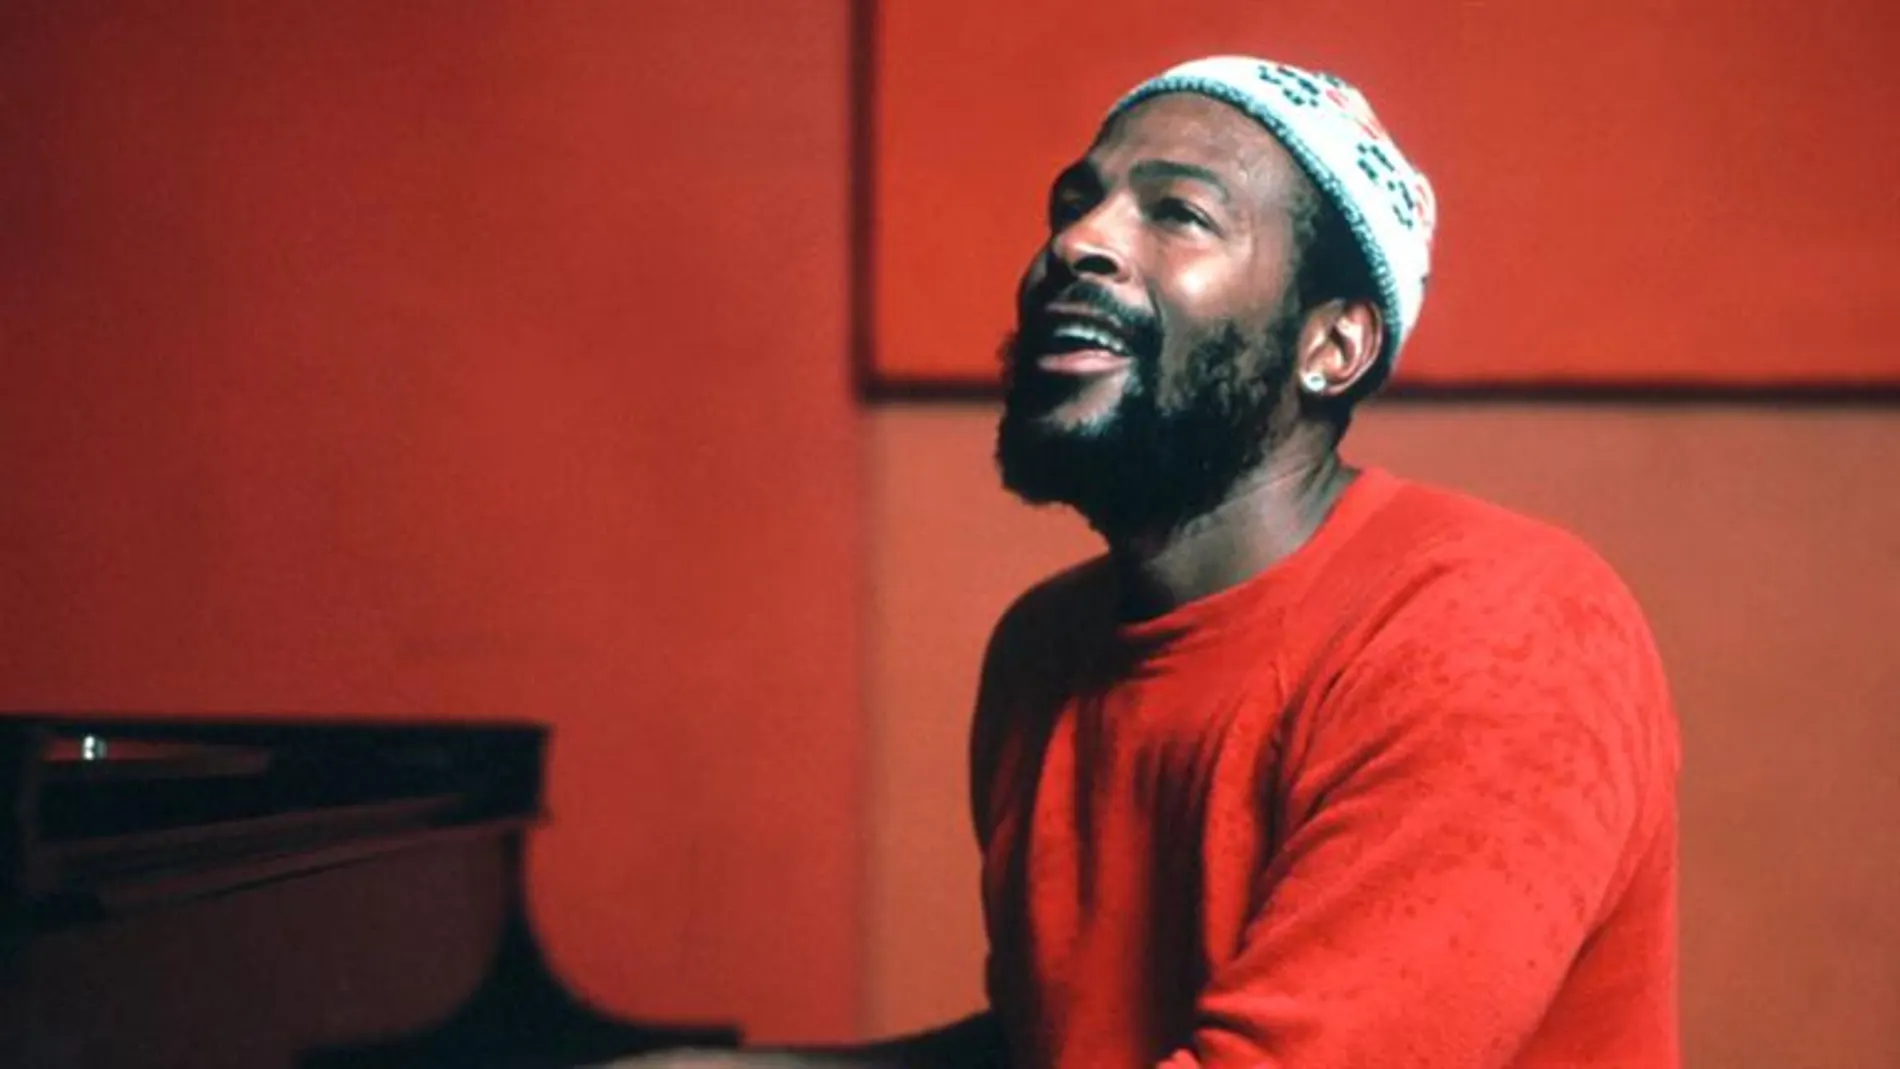 El artista Marvin Gaye publicó "What's Going On"